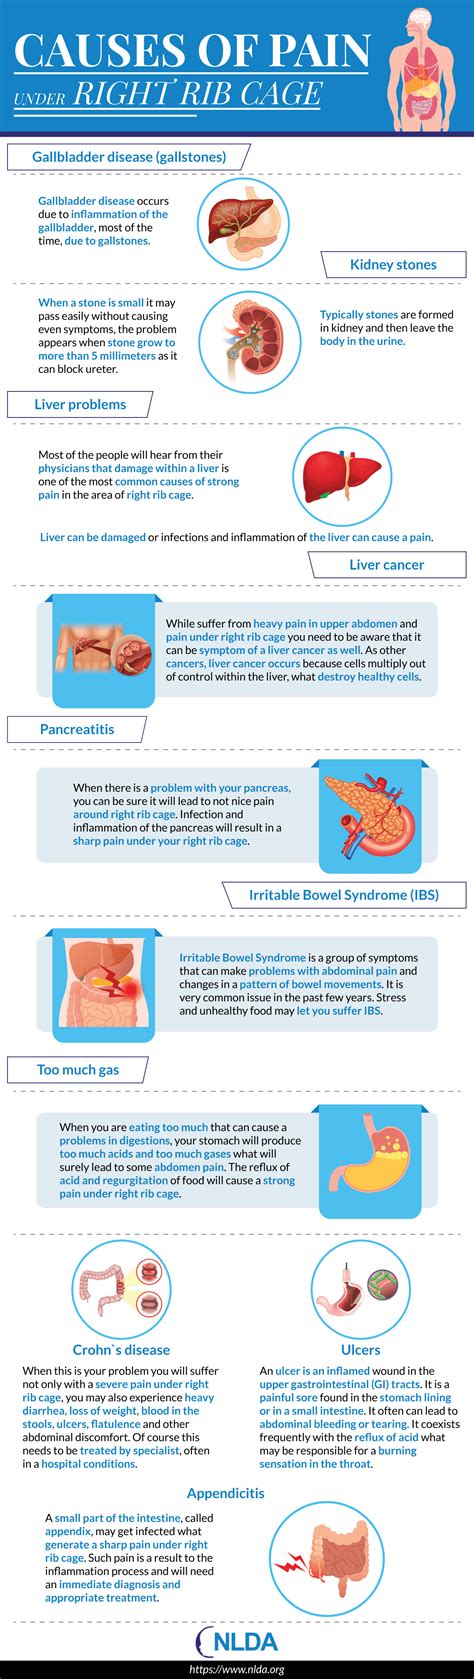 This is a common problem faced by many people across the world, even those who are in good health otherwise. 12 Common Causes of Pain under Right Rib Cage + Infographic - 3